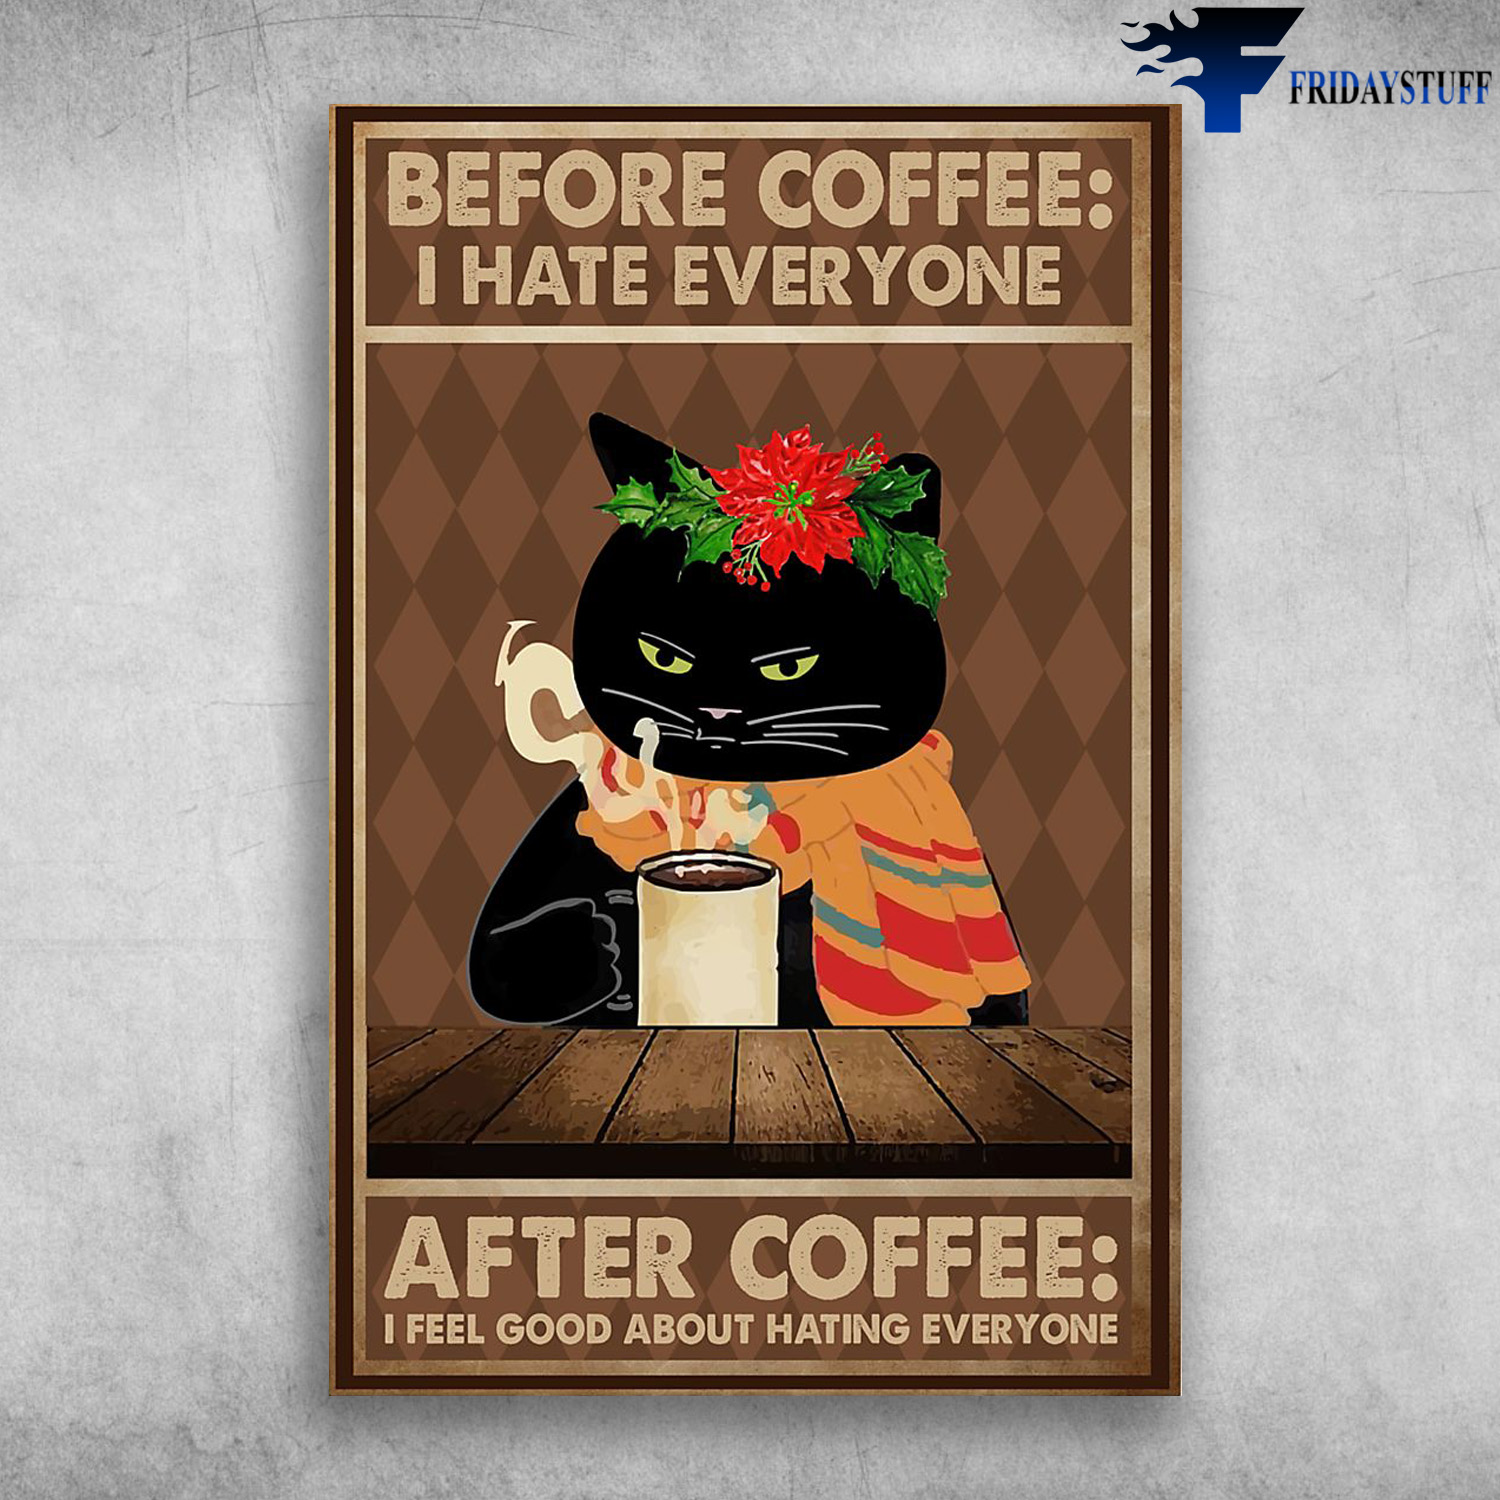 Black Cat Love Drink Coffee - Before Coffee I Hate Everyone, After Coffee I Feel Good About Hating Everyone